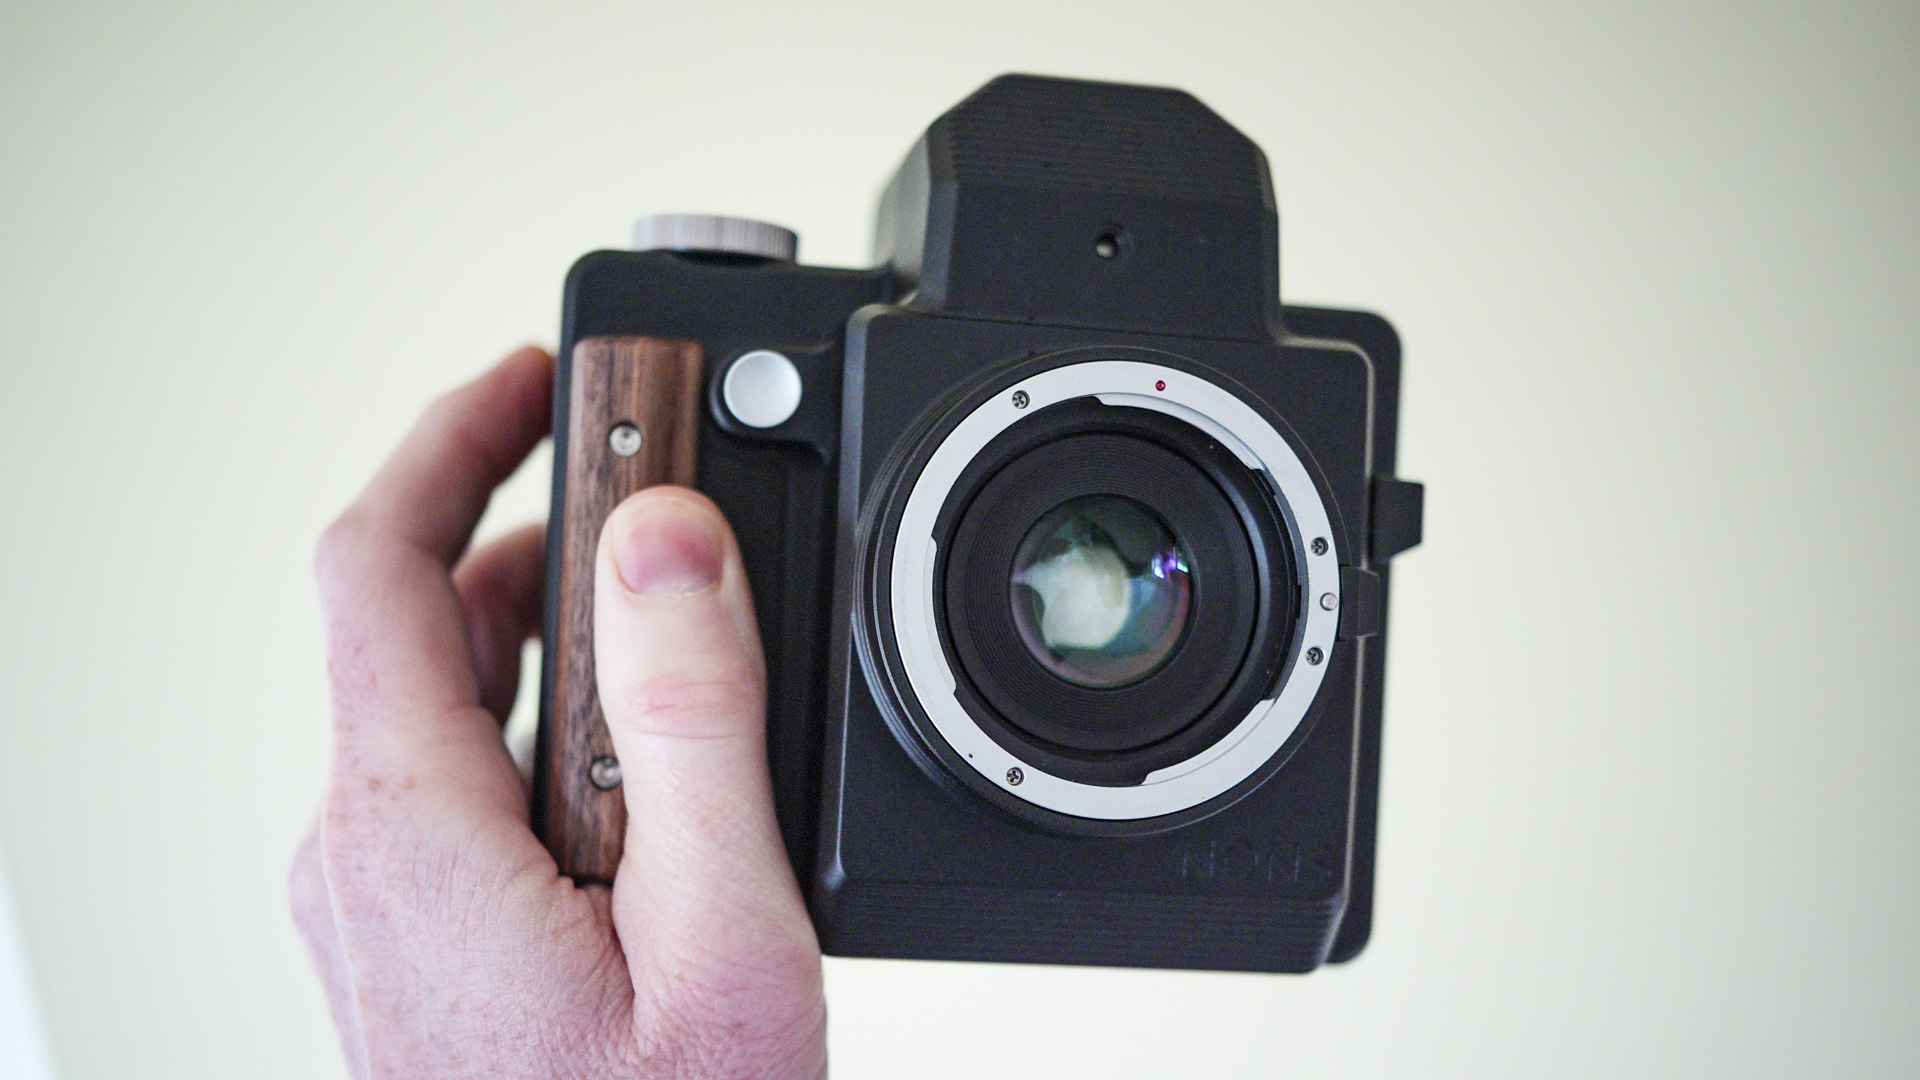 Nons SL660 instant camera in the hand, no lens attached